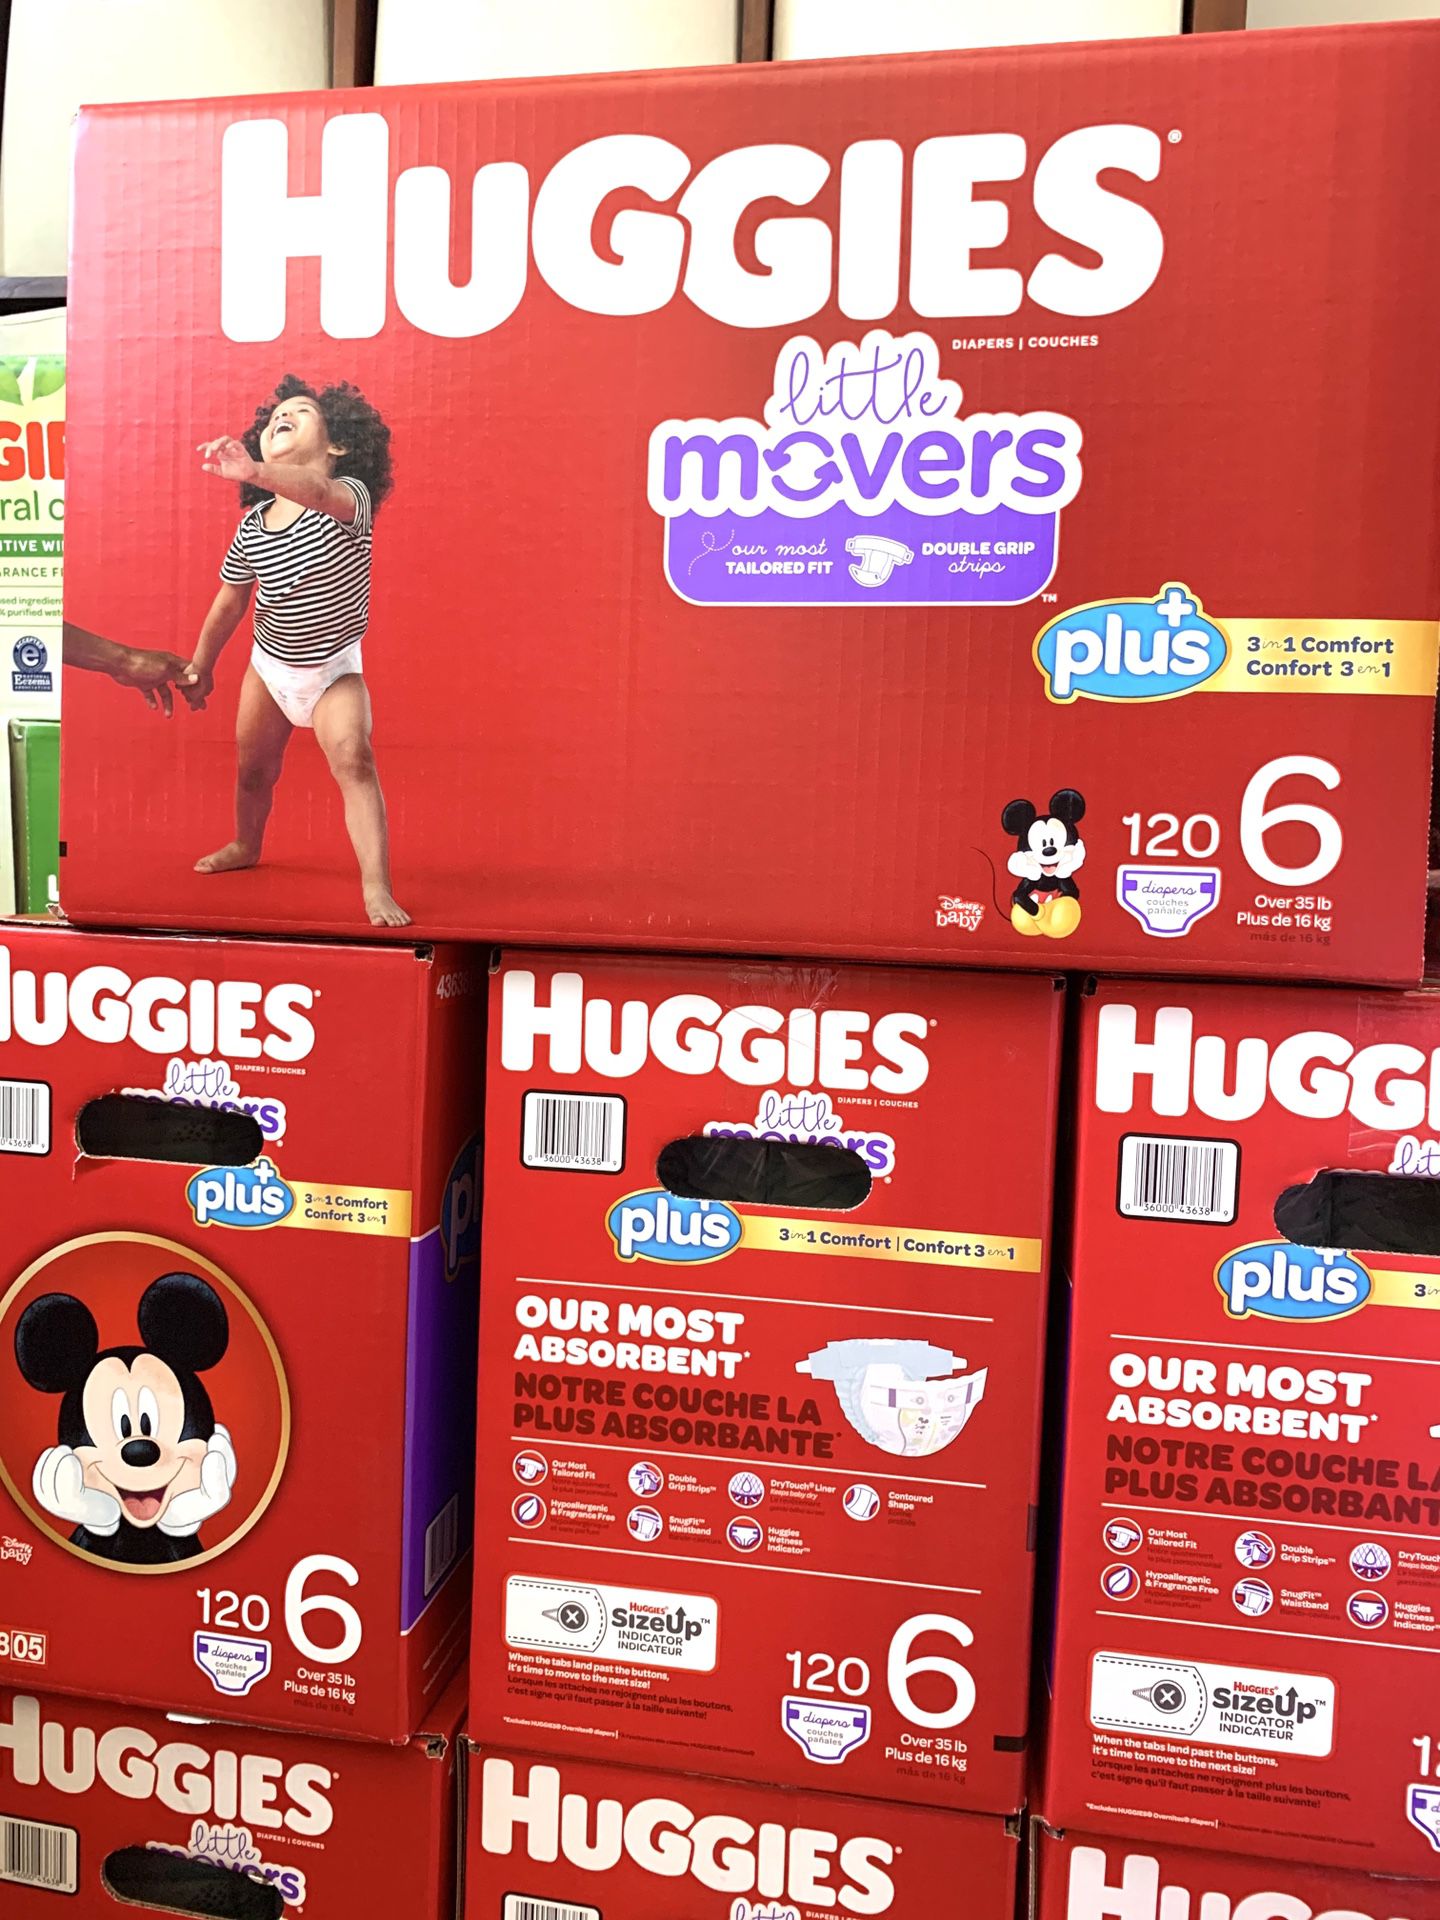 Huggies little movers size 6(120) diapers $47 per box